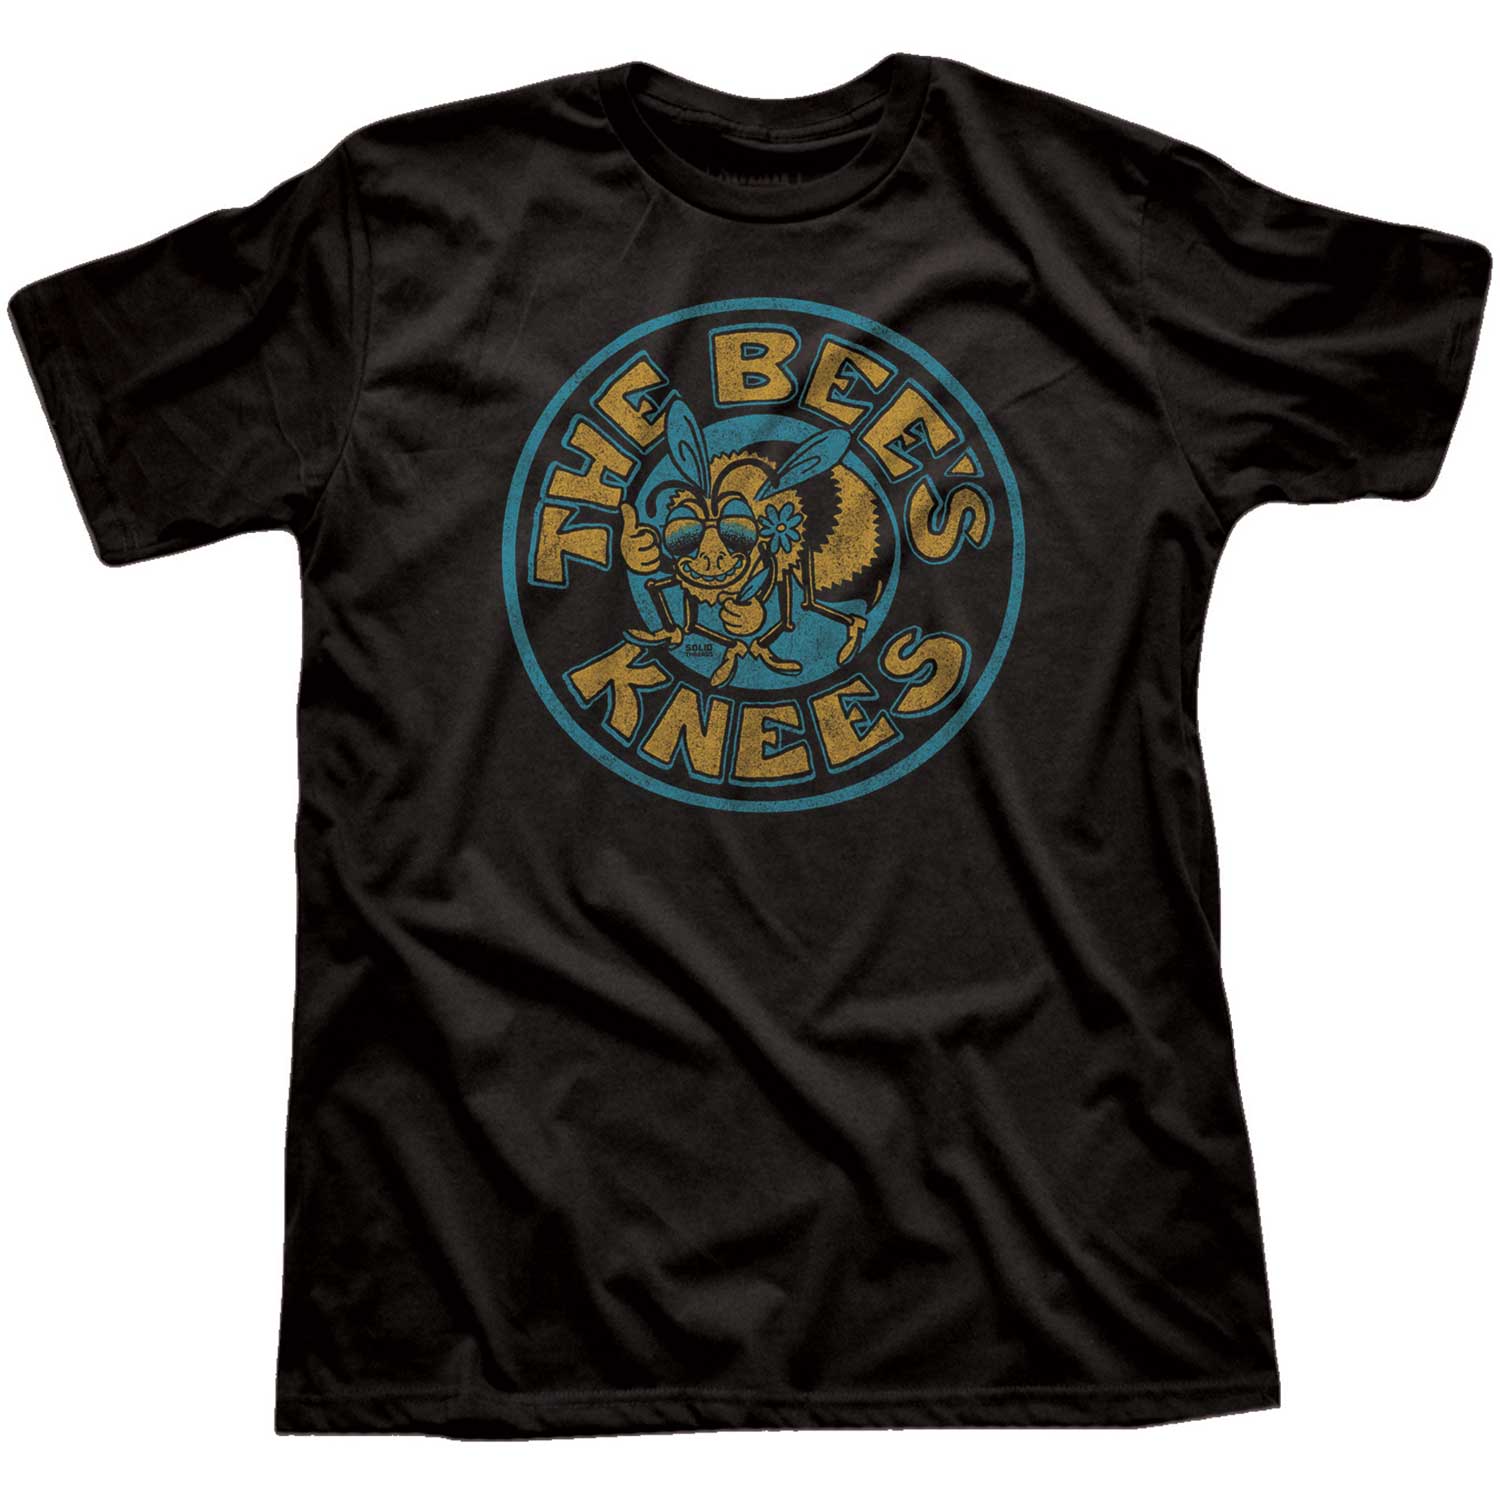 Men's The Bee's Knees Vintage Graphic T-Shirt | Funny Pollinator Dark Charcoal Tee | Solid Threads